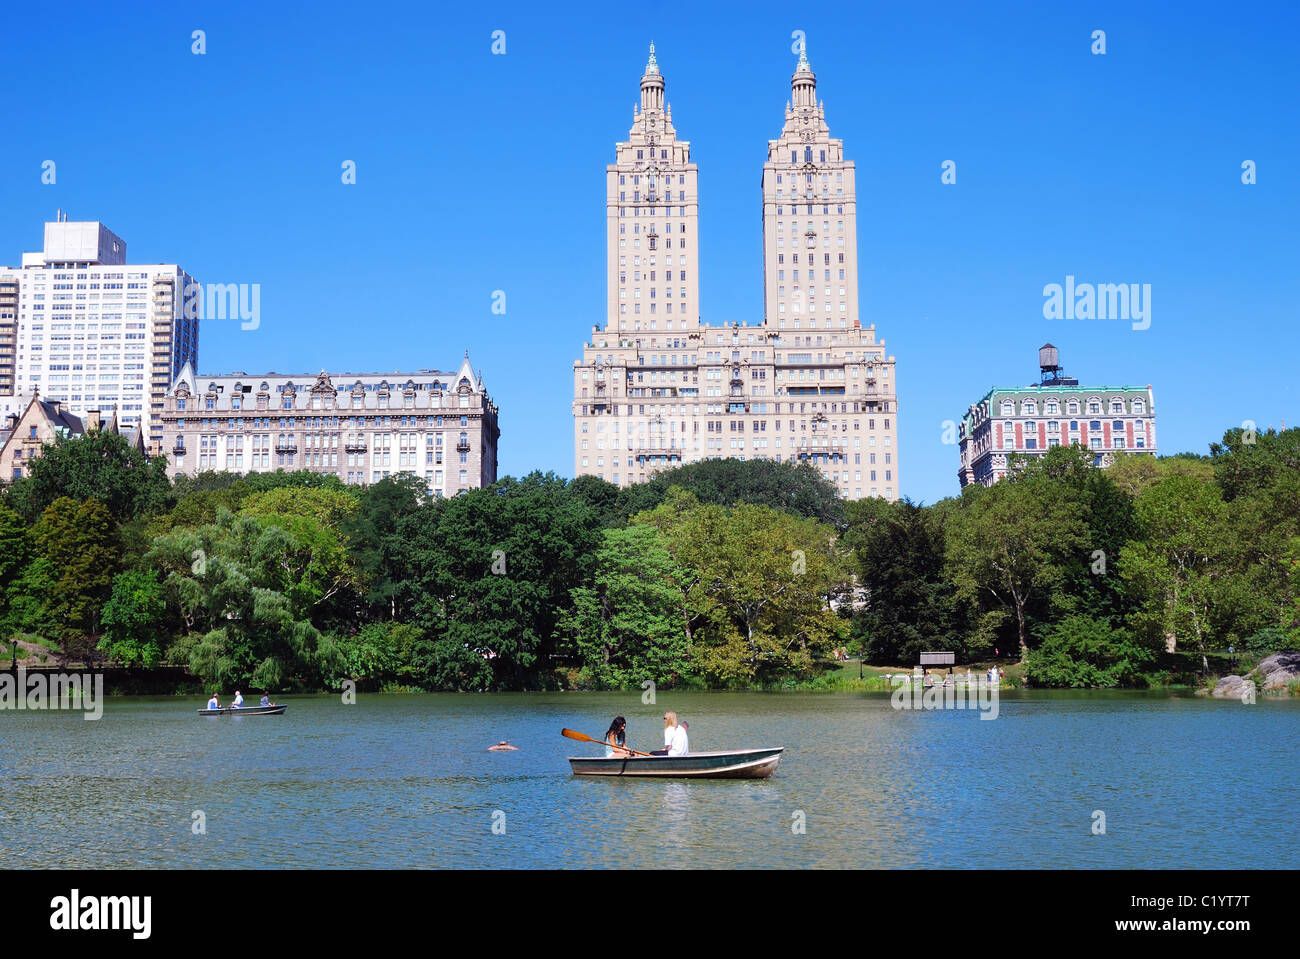 New York City Central Park with Manhattan skyline skyscrapers and blue ...